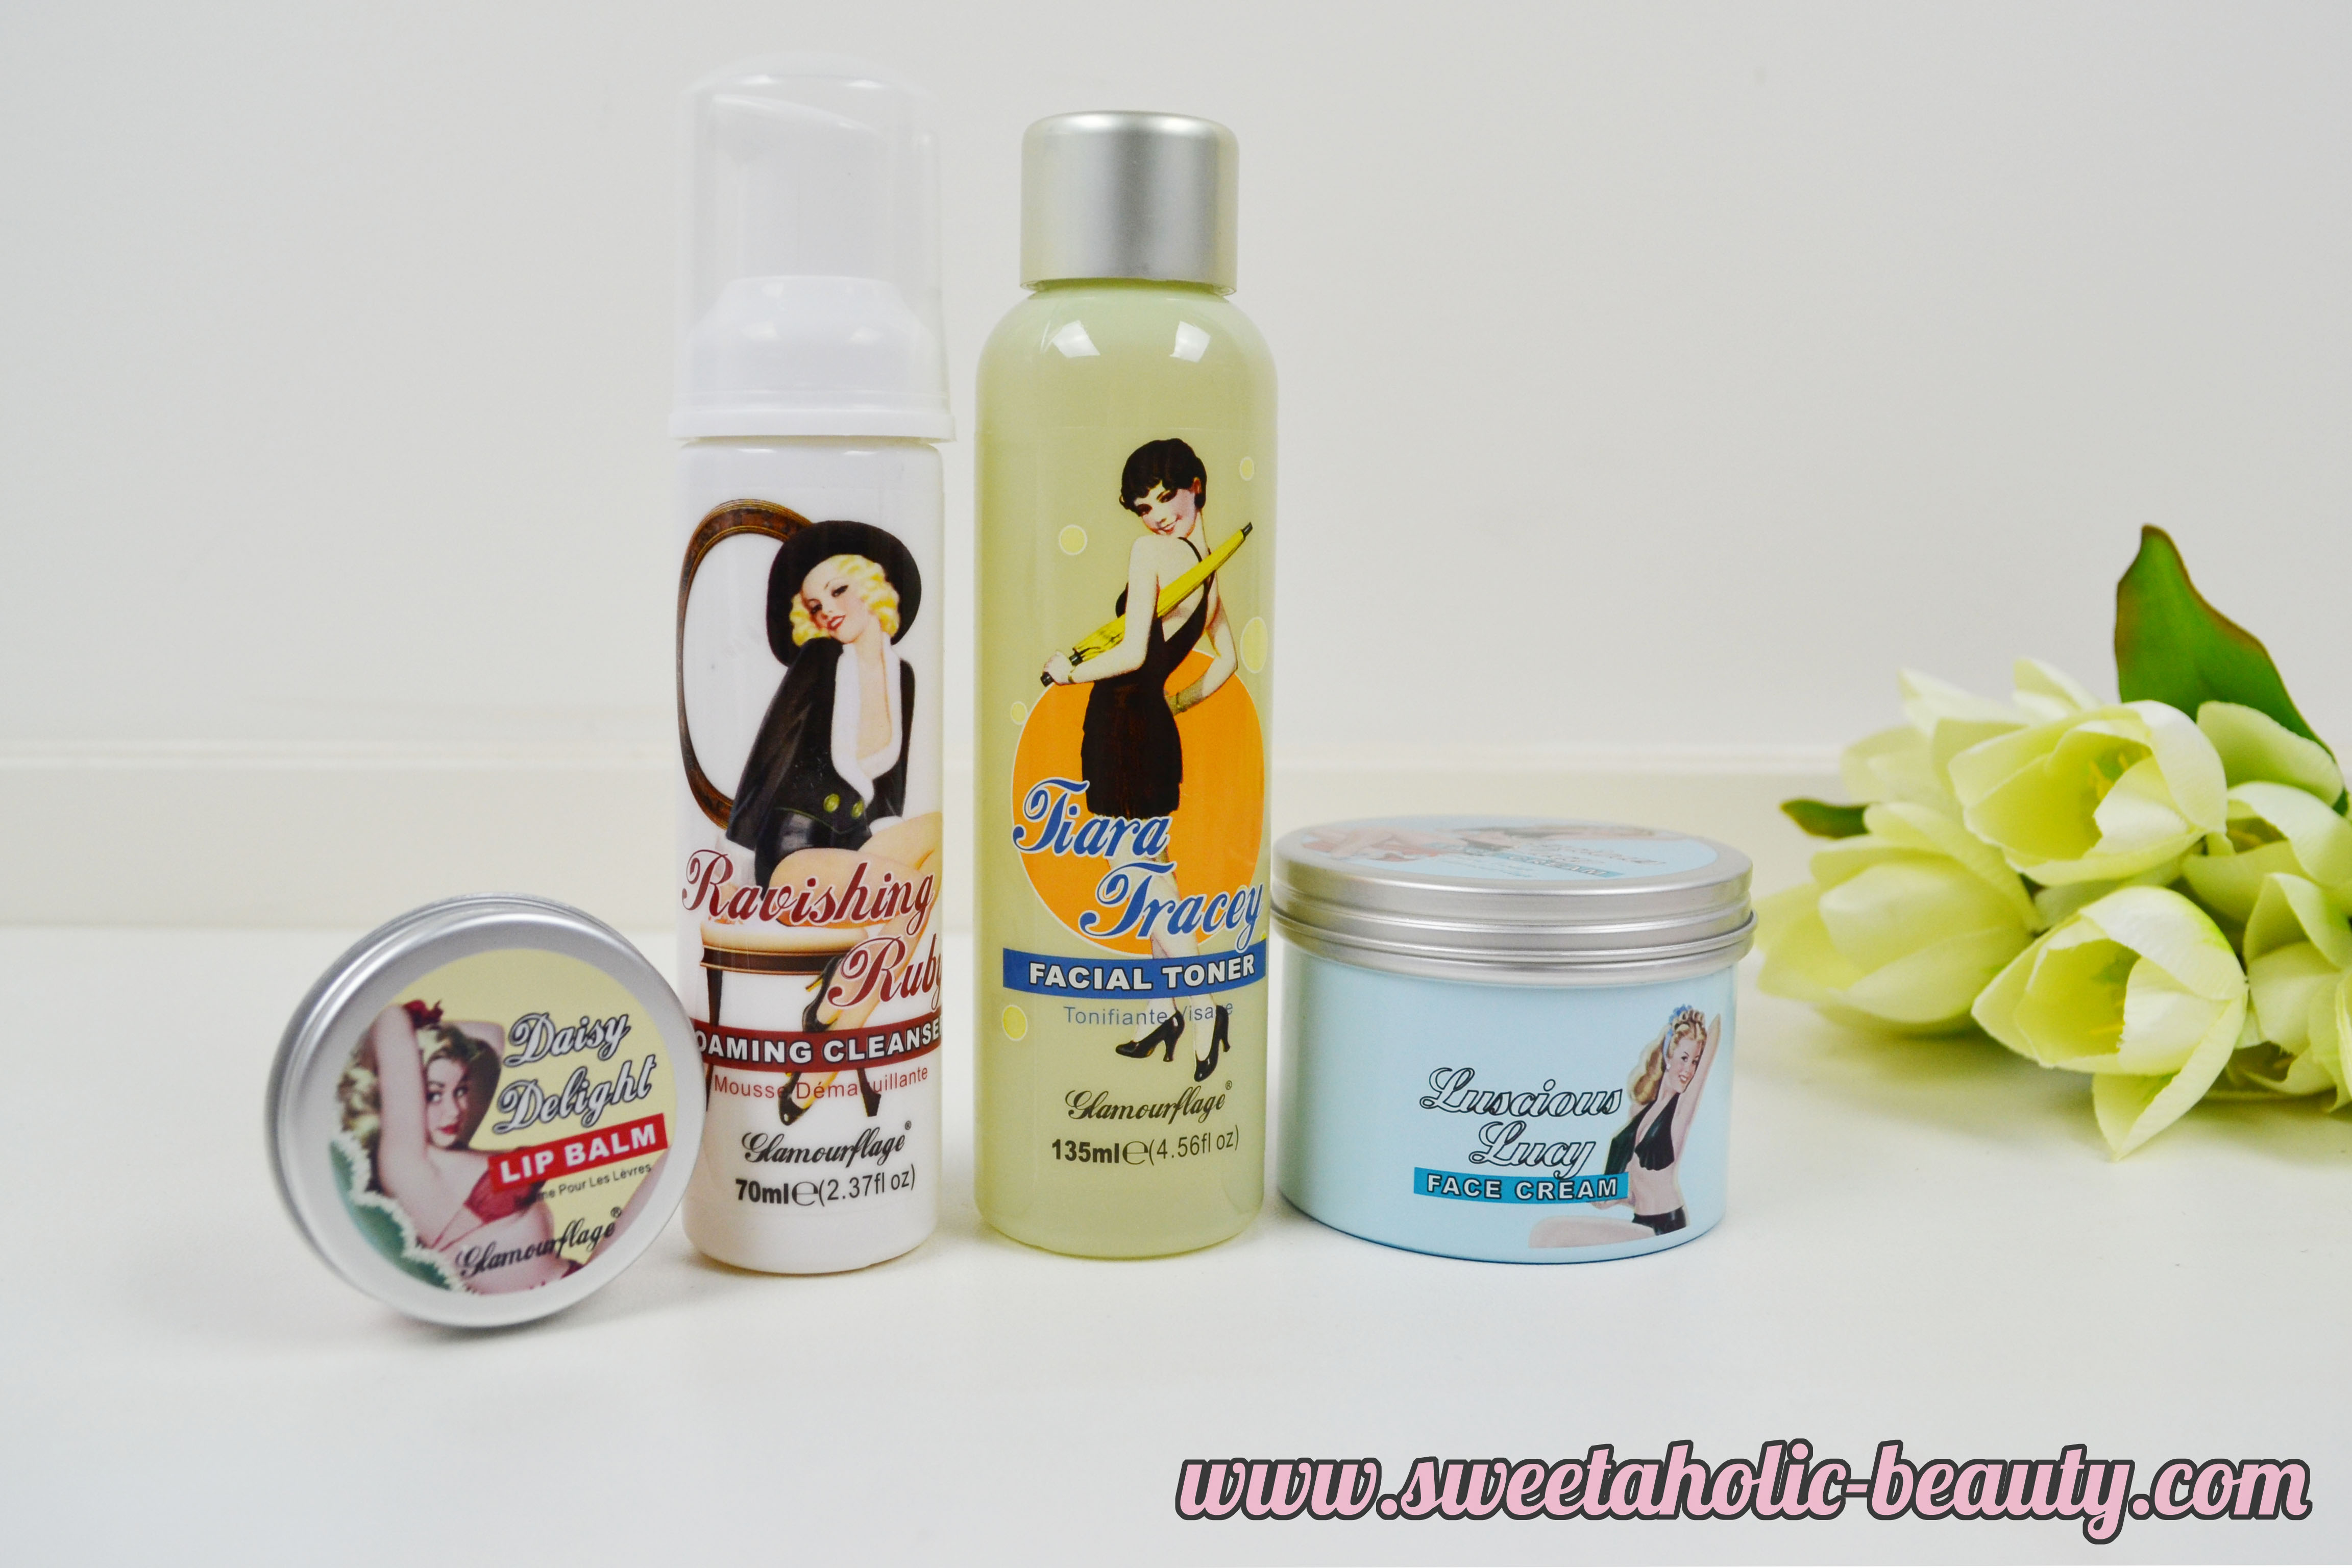 Glamourflage Skincare Brand Focus Review - Sweetaholic Beauty